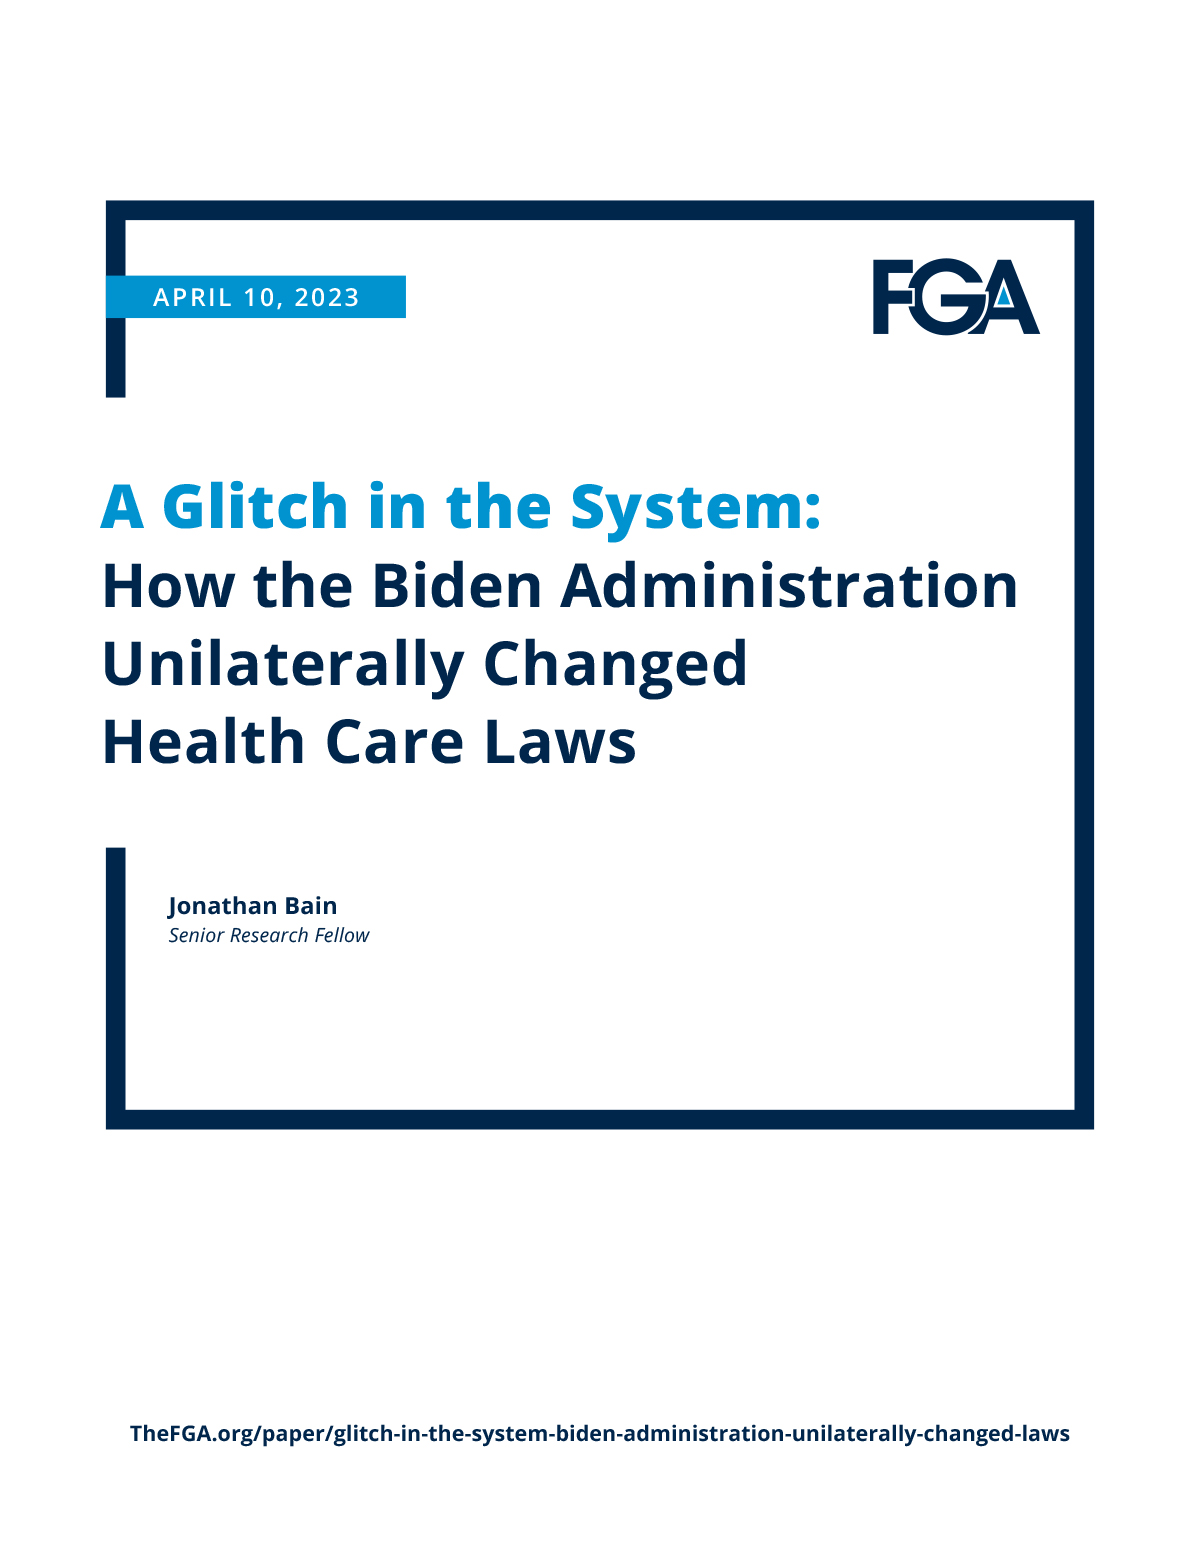 A Glitch in the System: How the Biden Administration Unilaterally Changed Health Care Laws